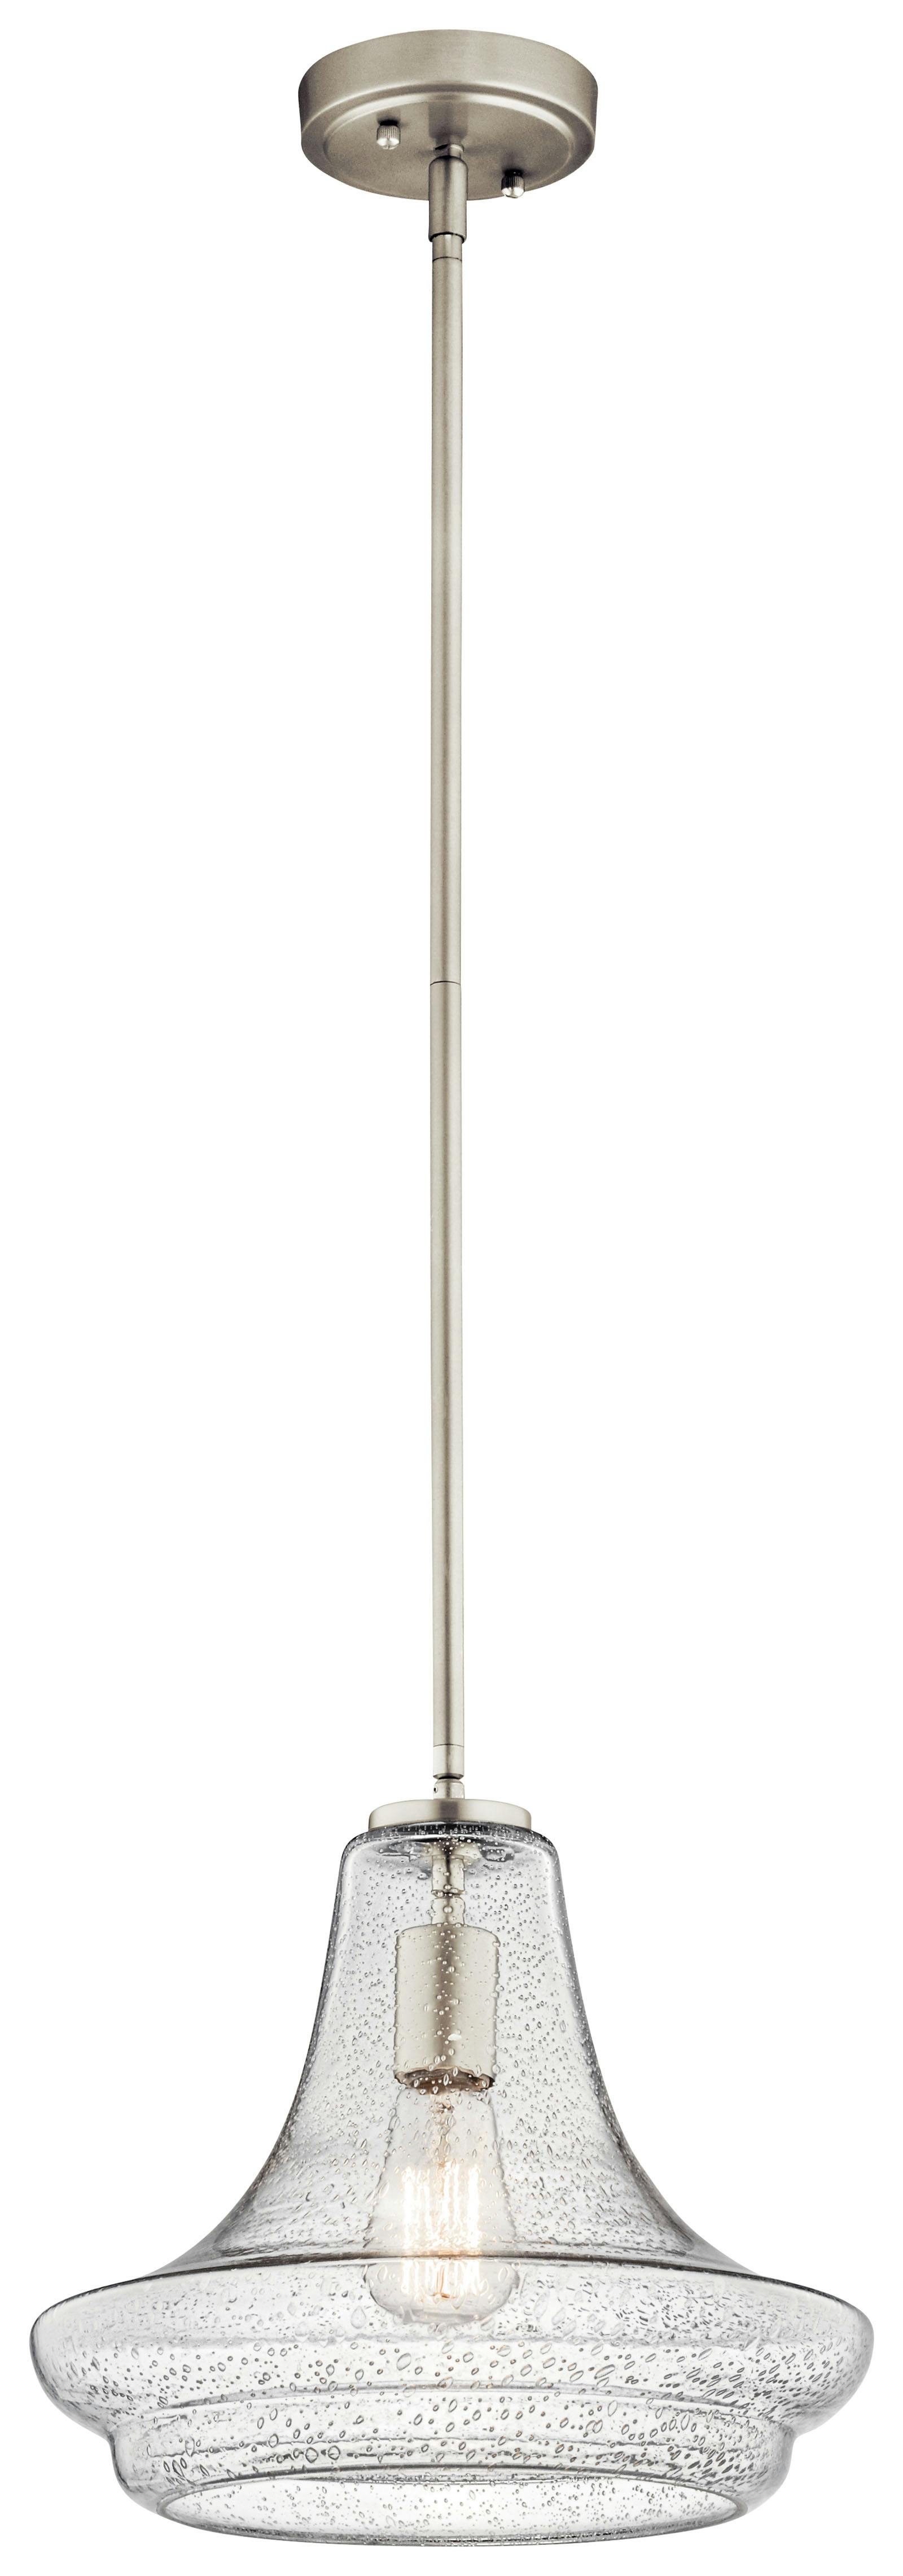 Everly 1 Light Nickel Pendant on a white background